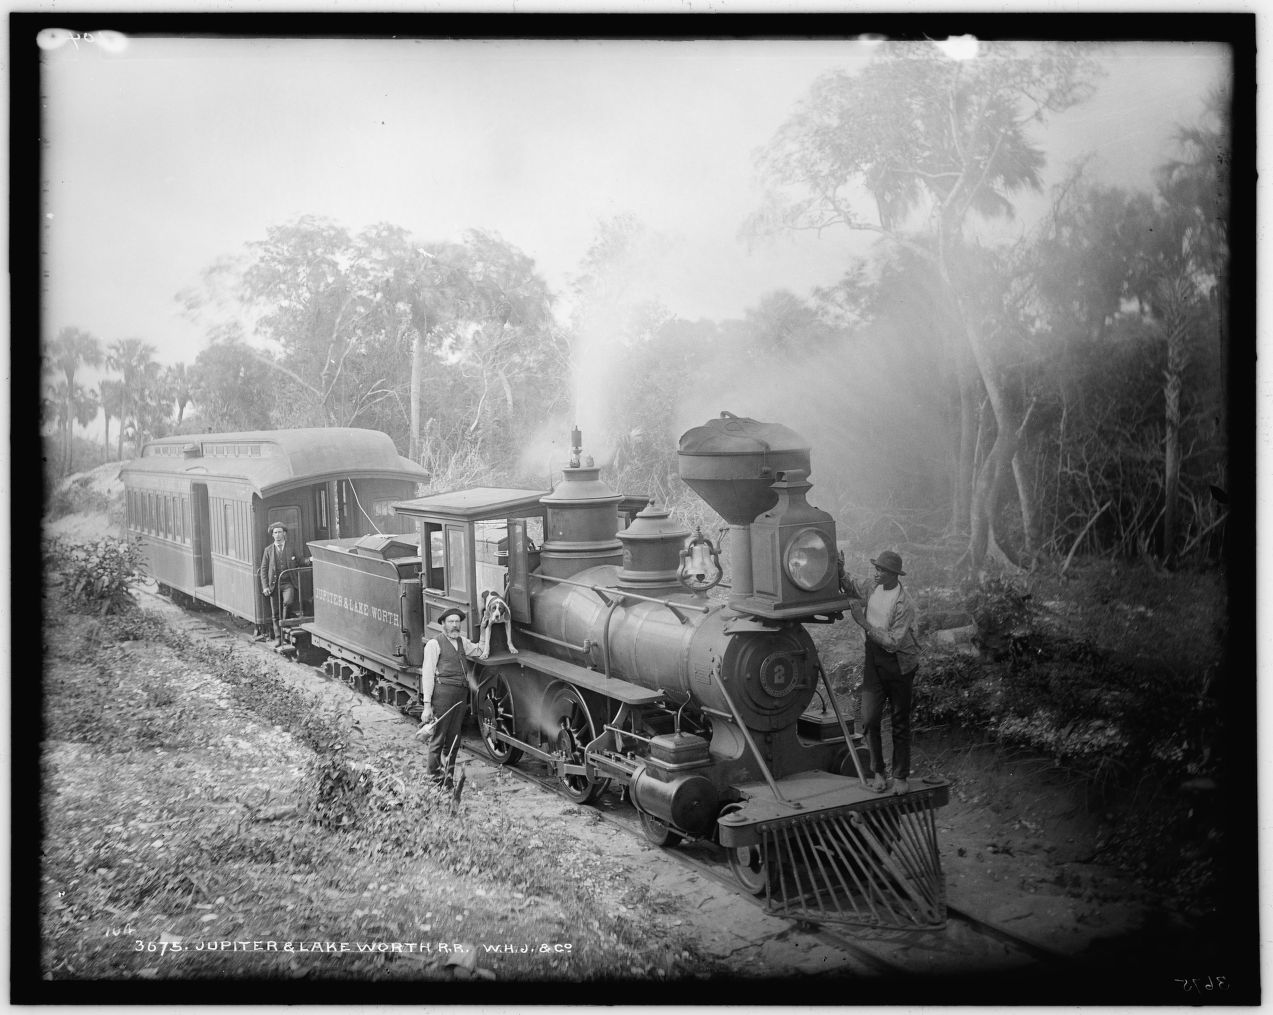 Photo of Jupiter and Lake Worth R.R. train No. 2; source: Library of Congress